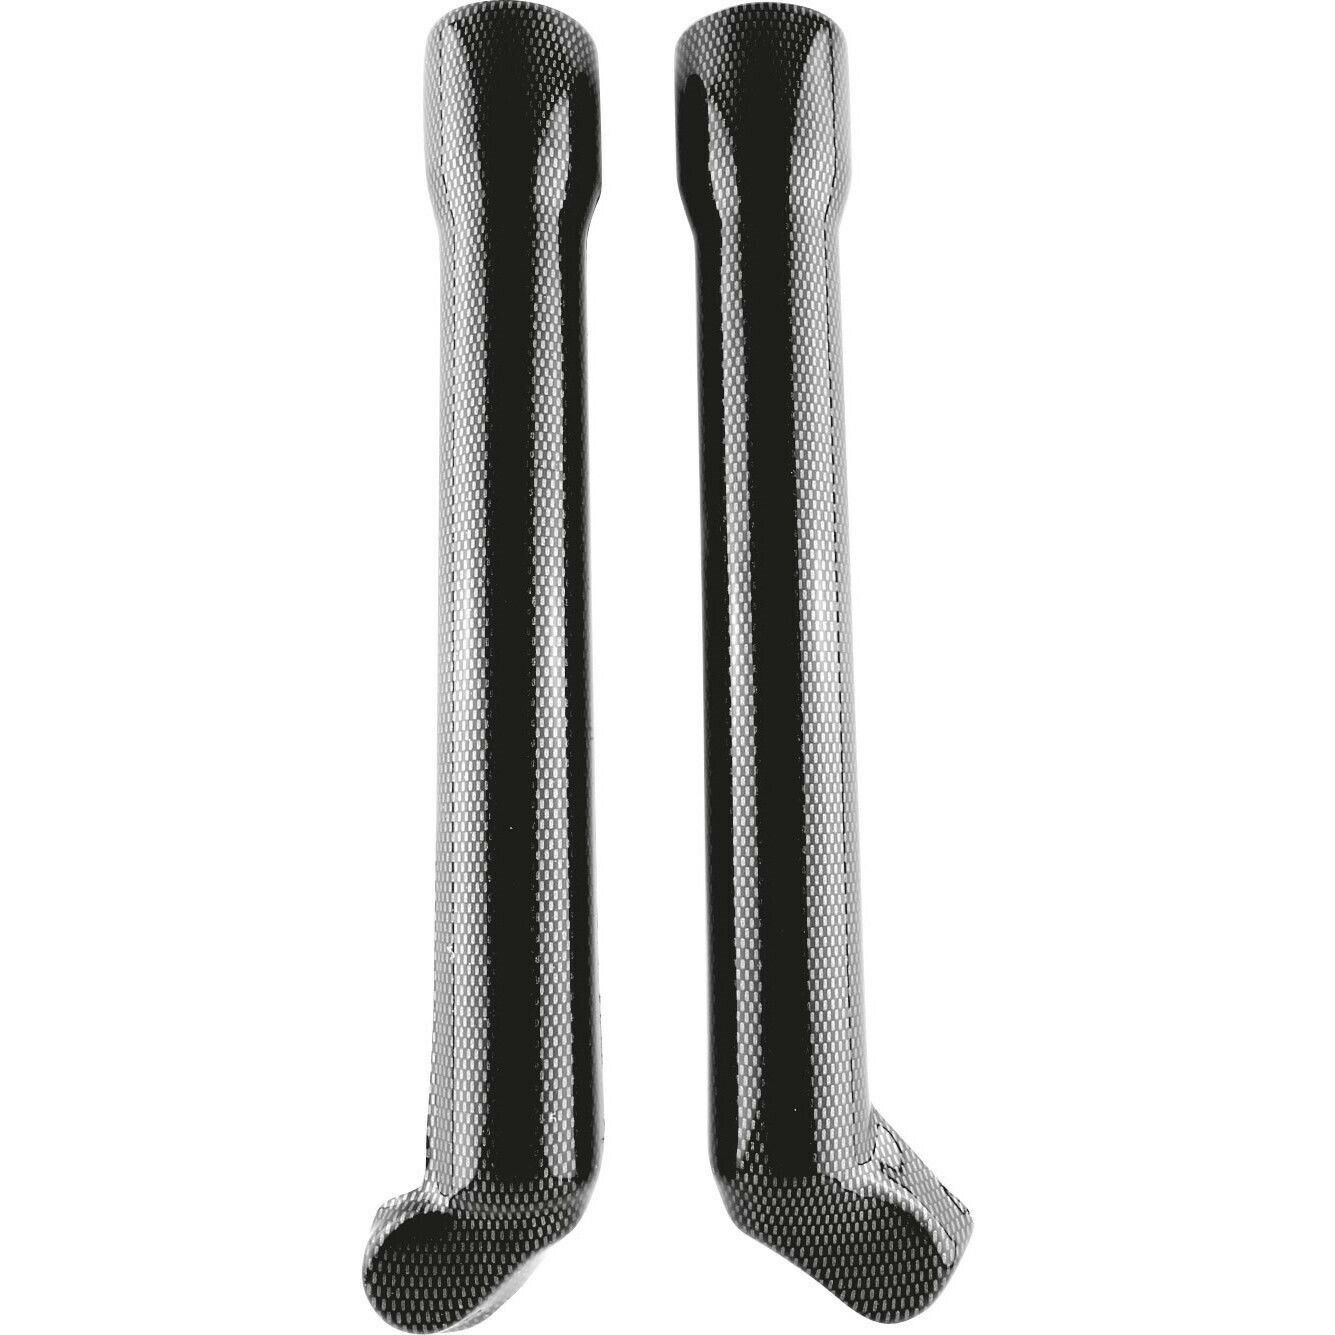 Apico Frame Guards - Lower - GAS-GAS/OSSA/JOTAGAS/SCORPA 05-17 (Marzocchi 40MM Fork) -Carbon Look - Apico